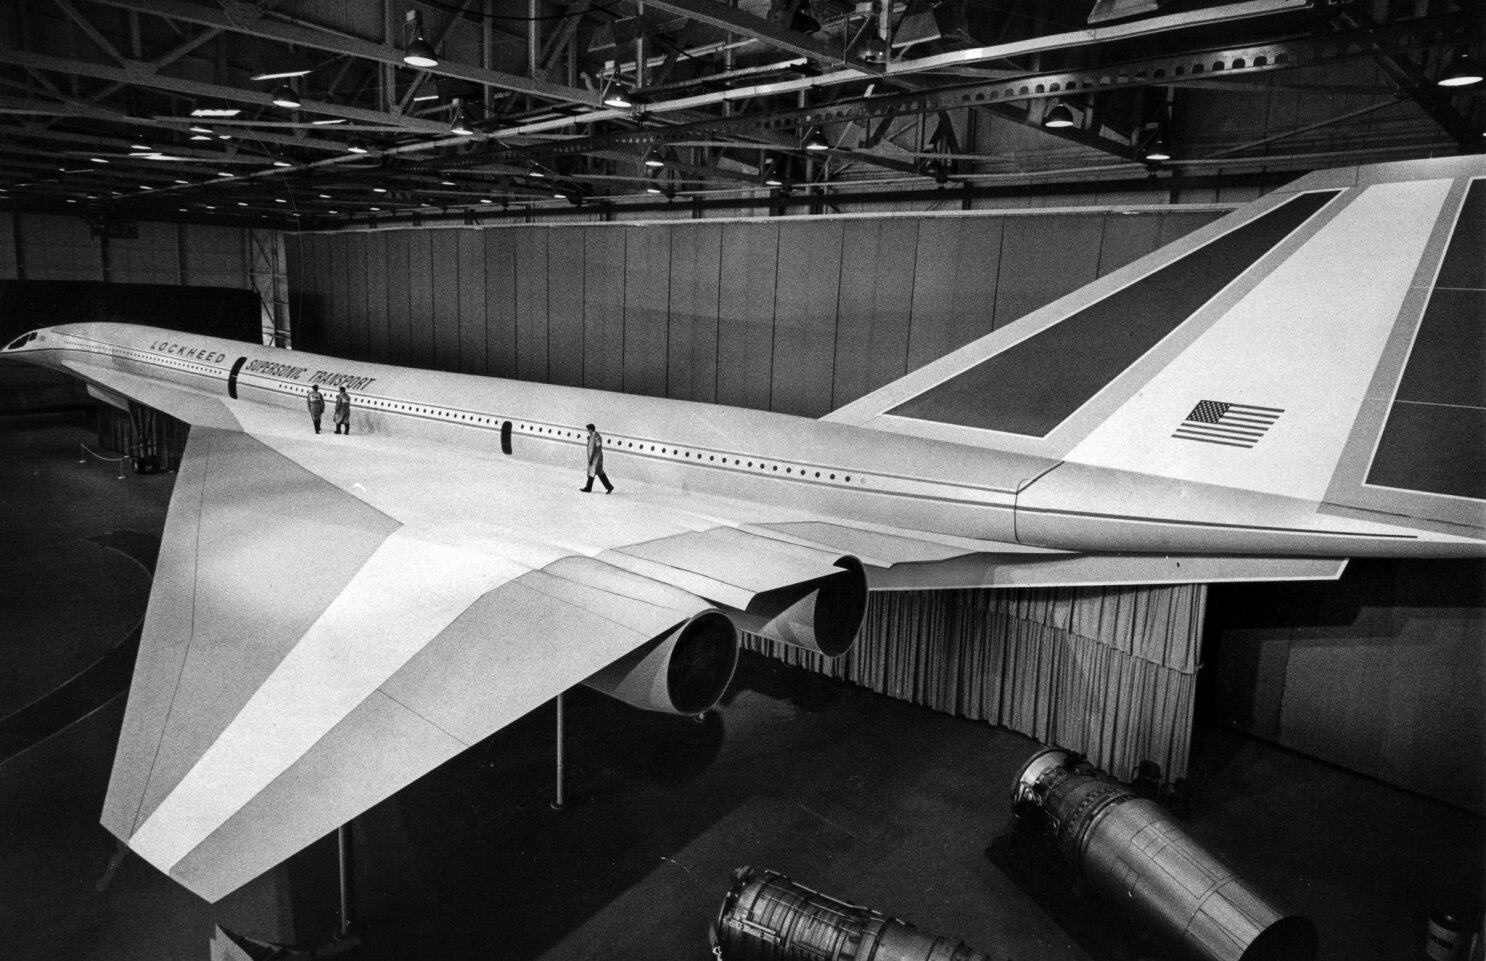 Download From The Archives Lockheed Mock Up Of Supersonic Transport Revealed Los Angeles Times